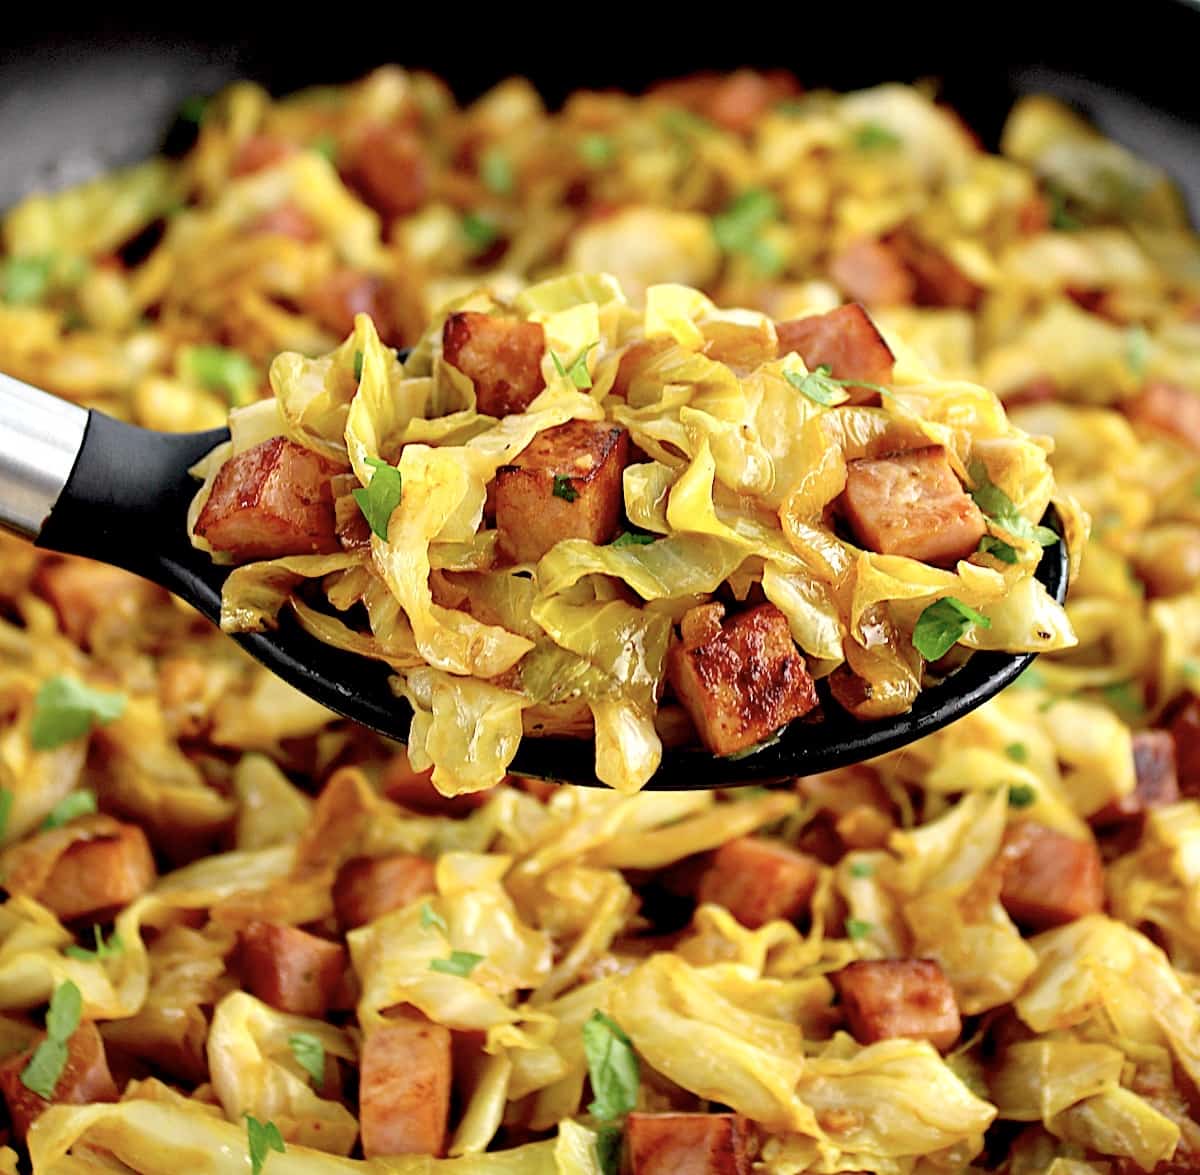 Fried Cabbage with Ham being held up by serving spoon